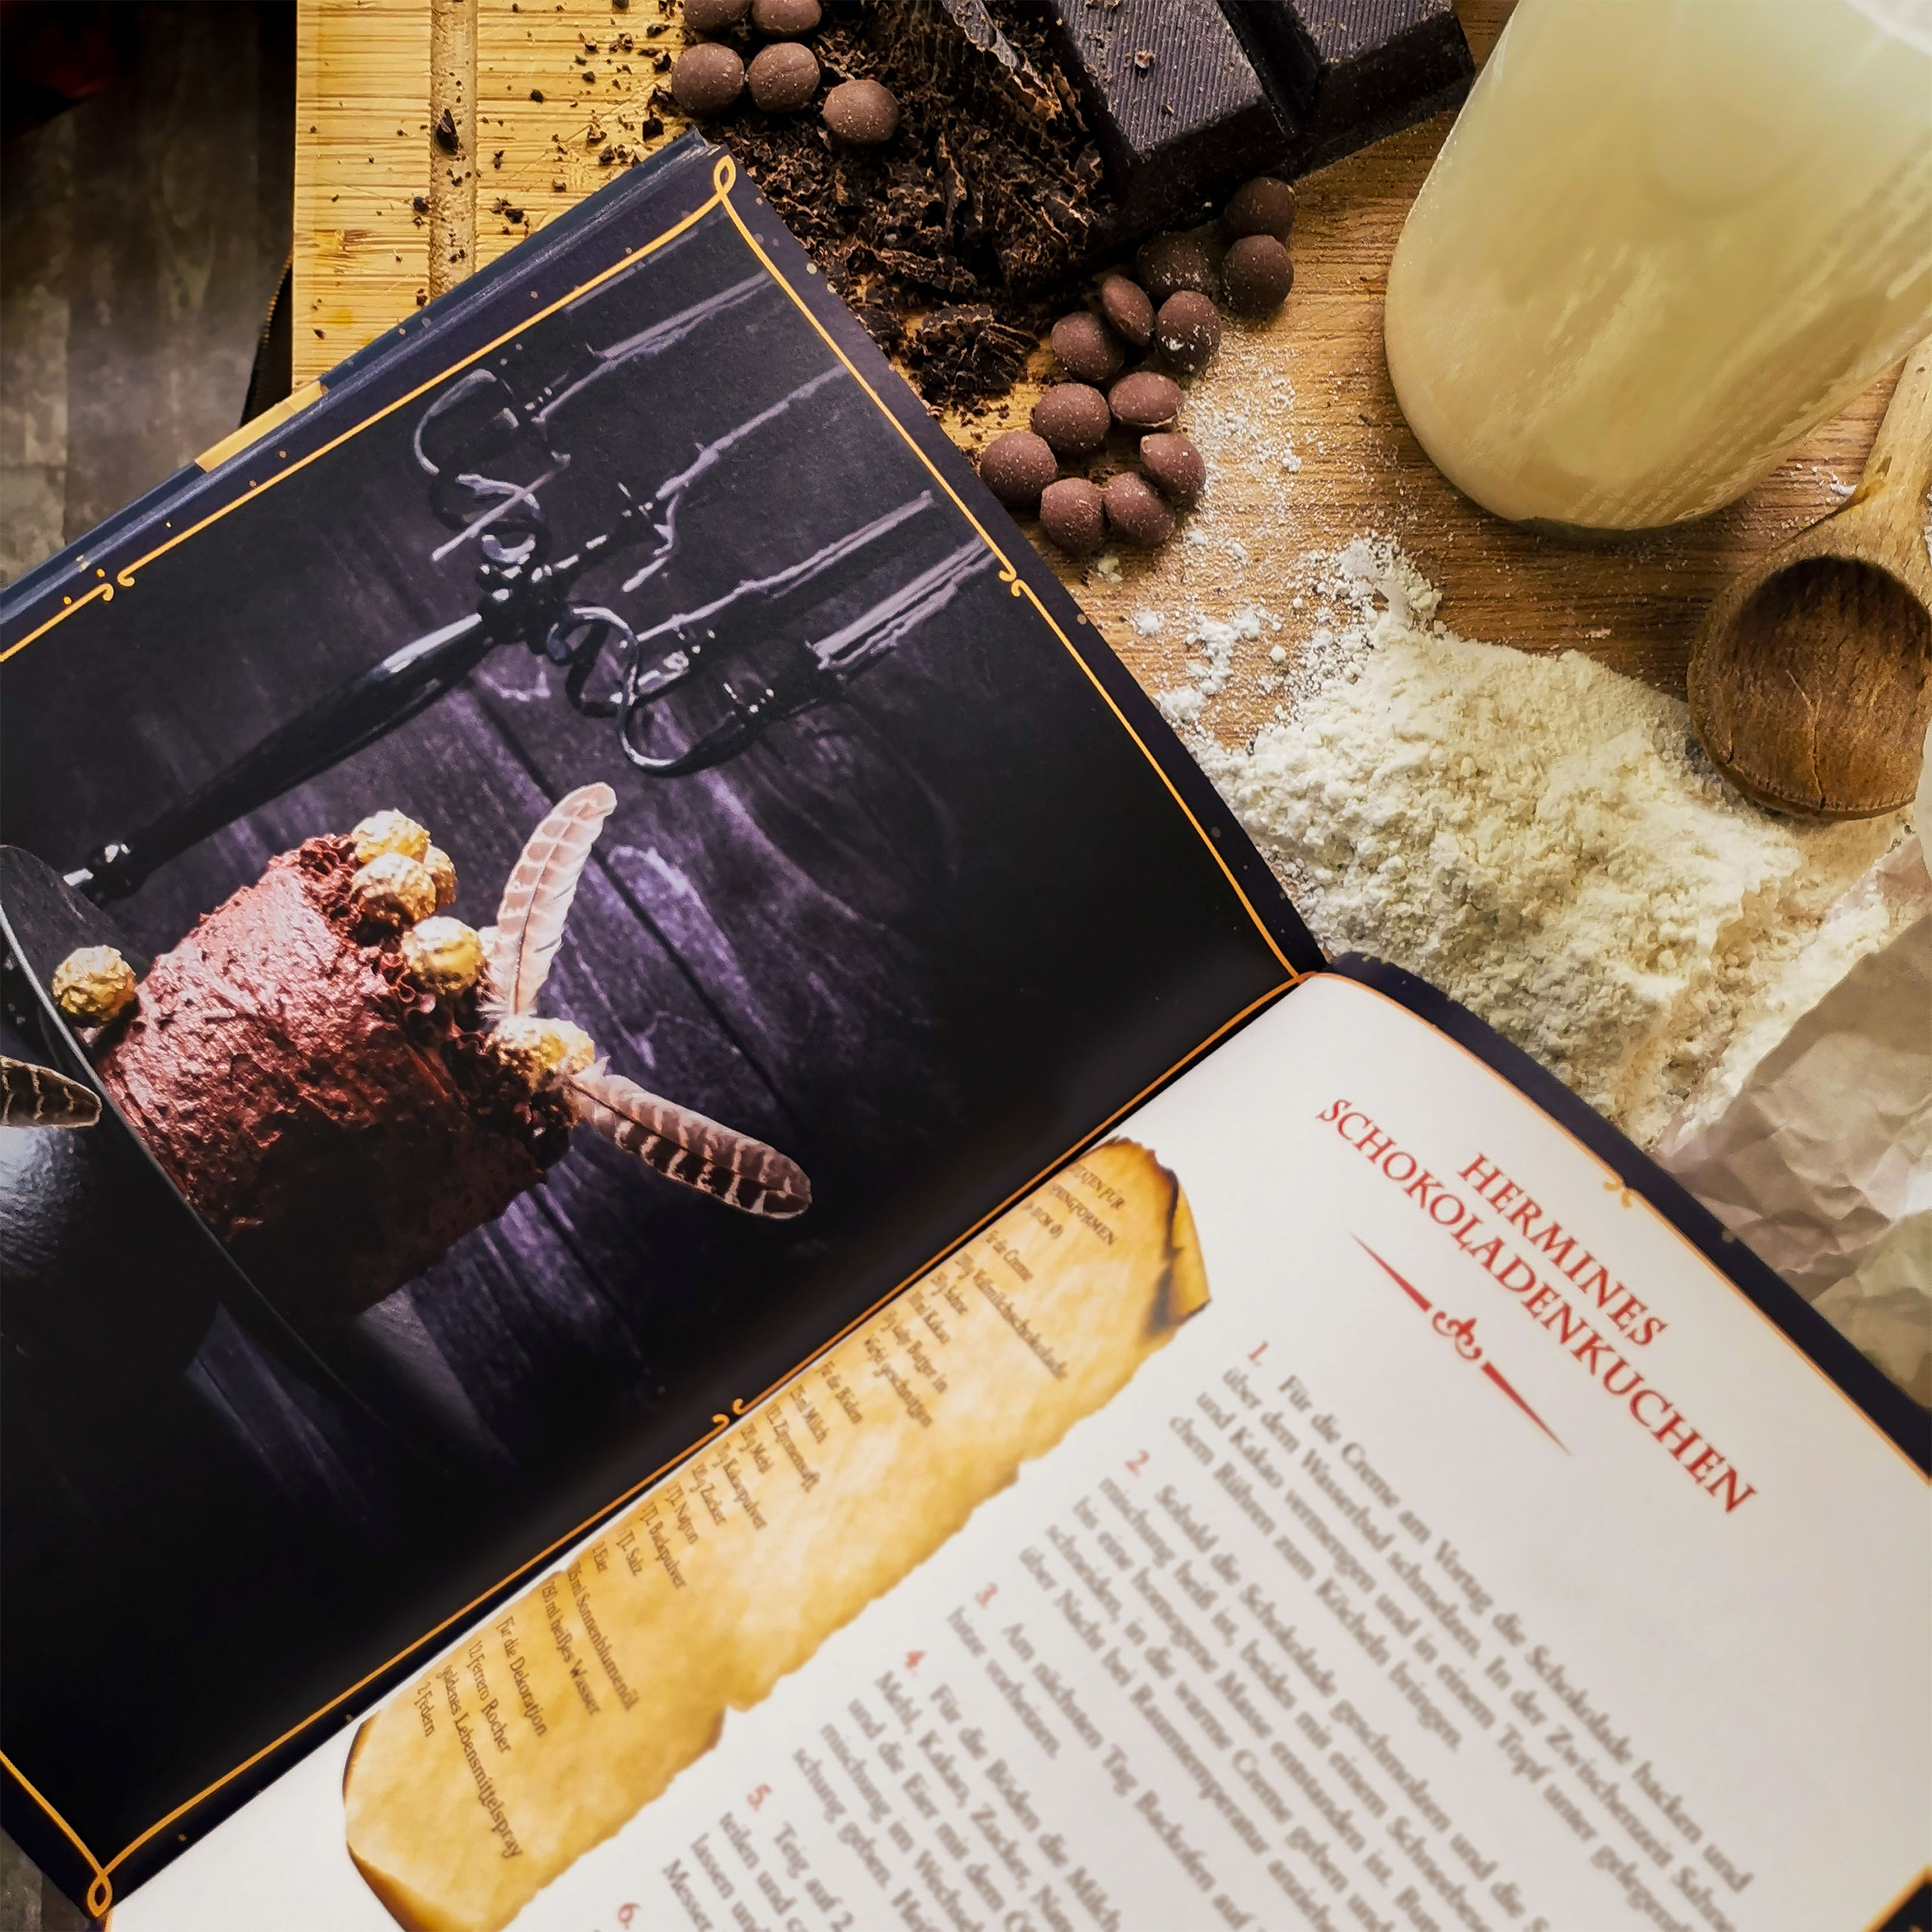 The Cooking and Baking Book for Potter Fans